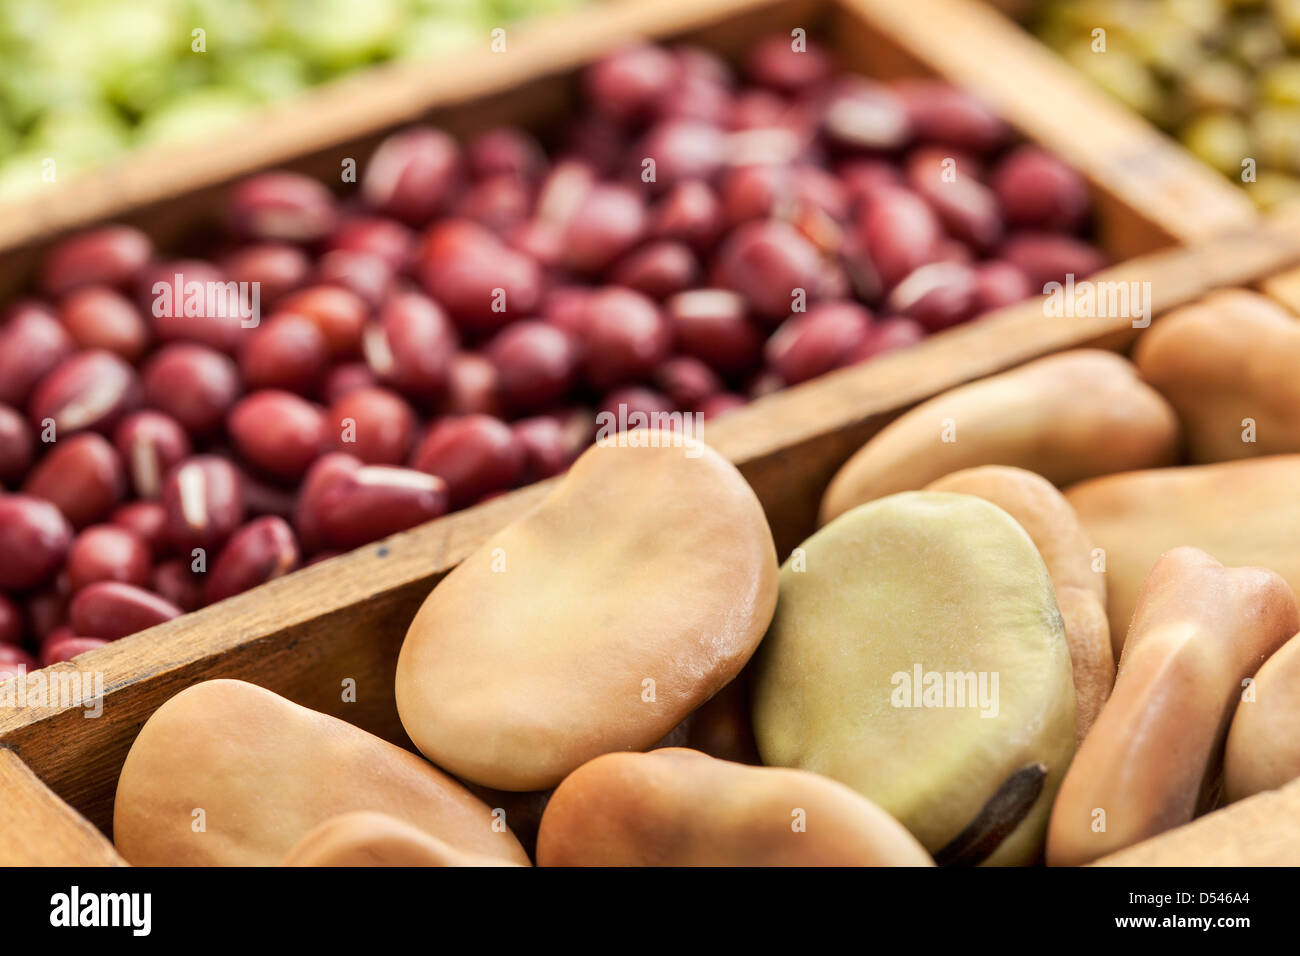 fava (broad) beans shot with shallow depth of field with adzuki beans and other legumes in background Stock Photo